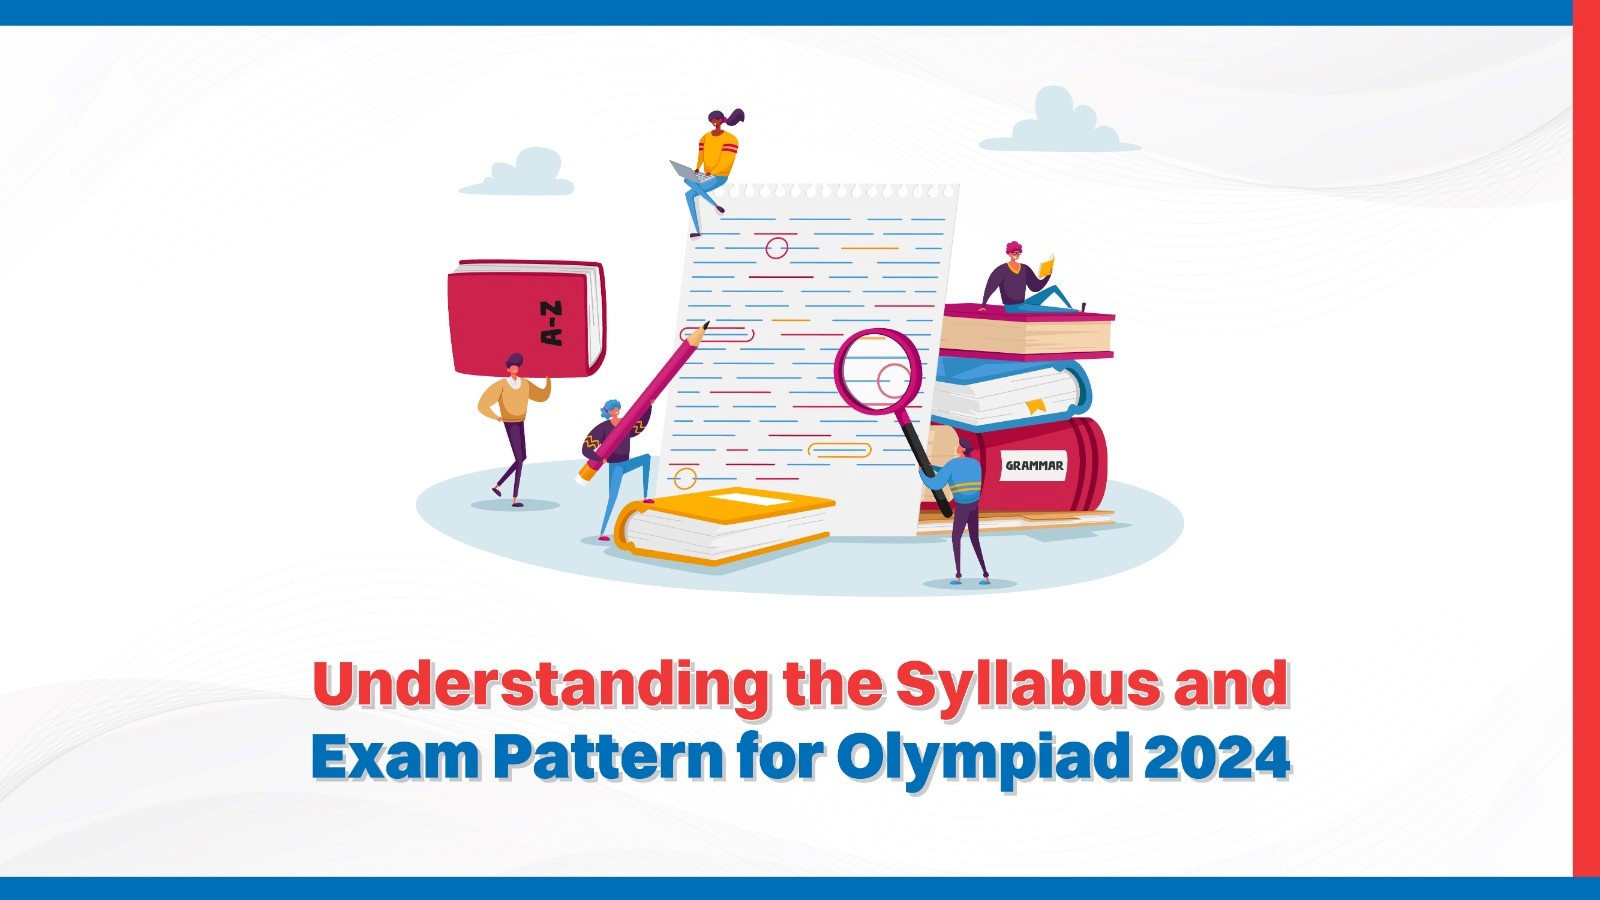 Understanding the Syllabus and Exam Pattern for Olympiad 2024